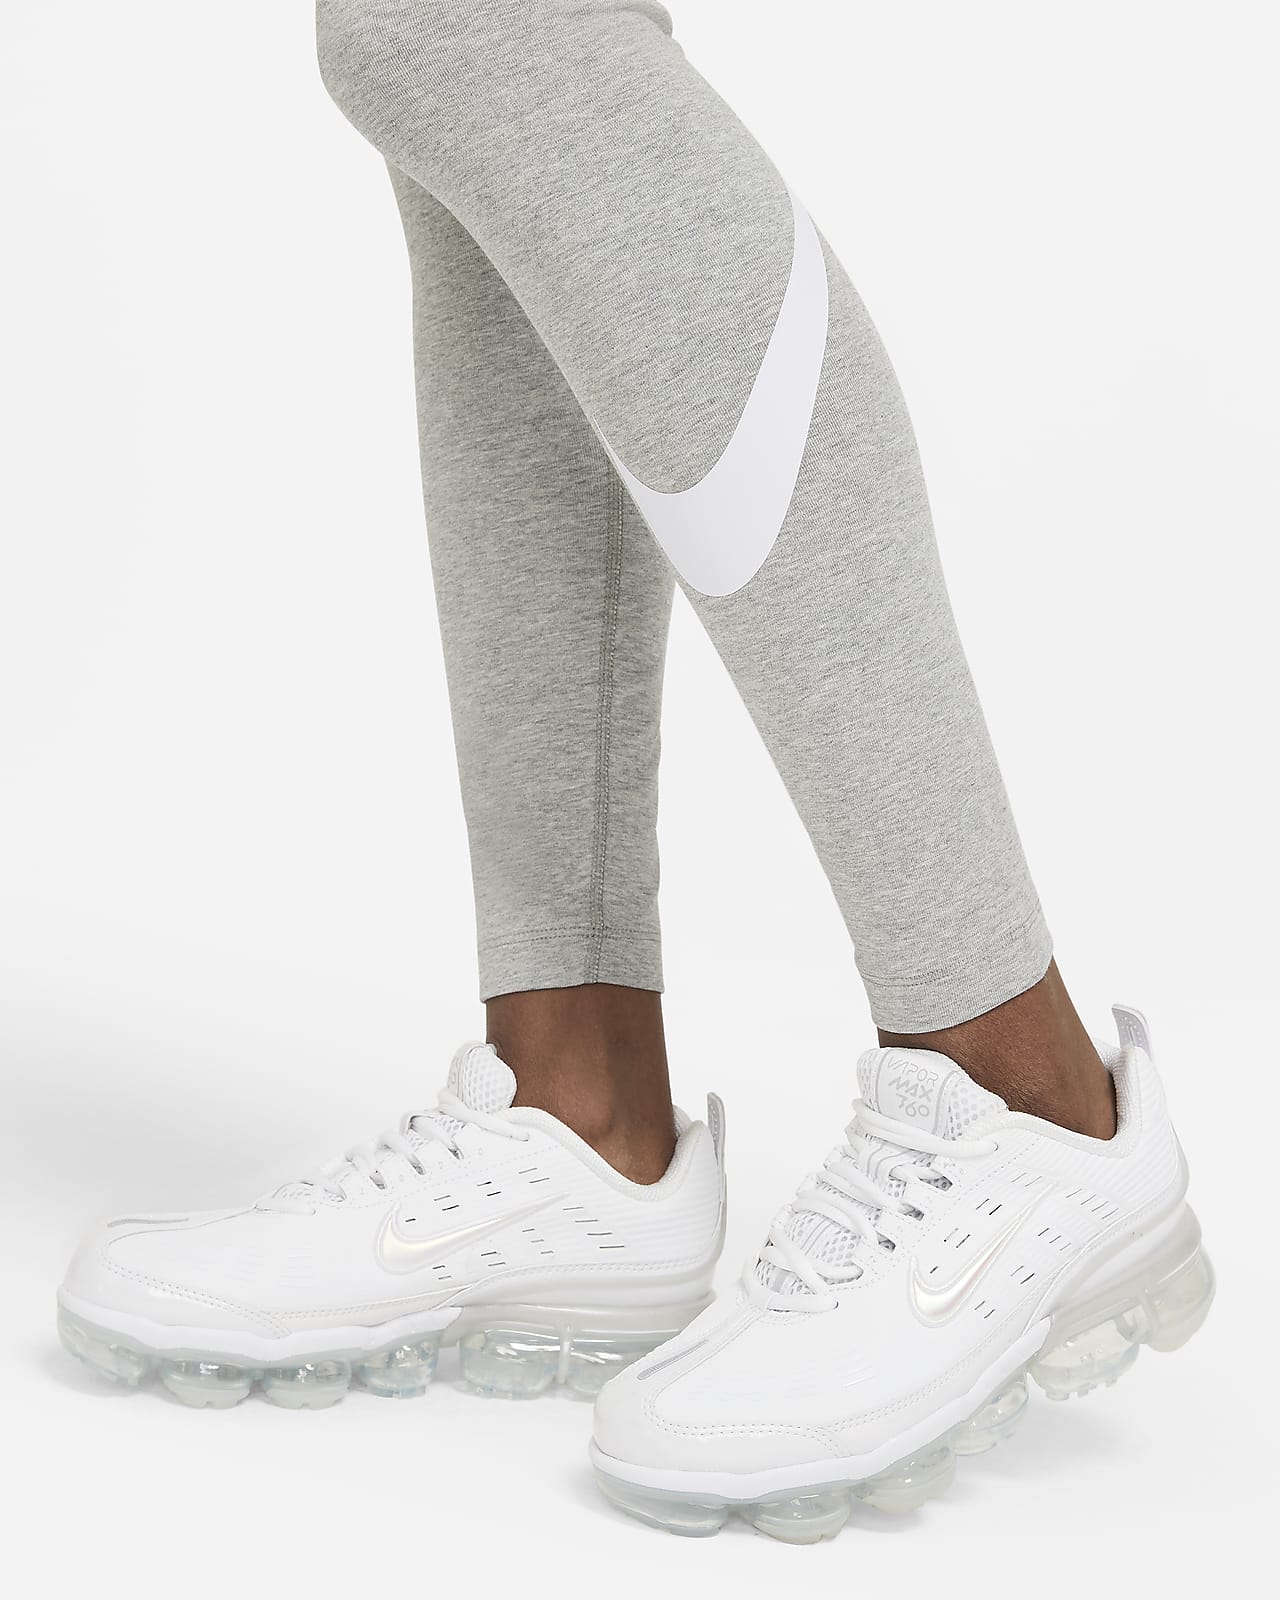 Nike Nsw Essential 7/8 Mid Rise Legging Tights, Women's, Size 2XL, Dk Grey  Heather/(White) : Buy Online at Best Price in KSA - Souq is now :  Fashion